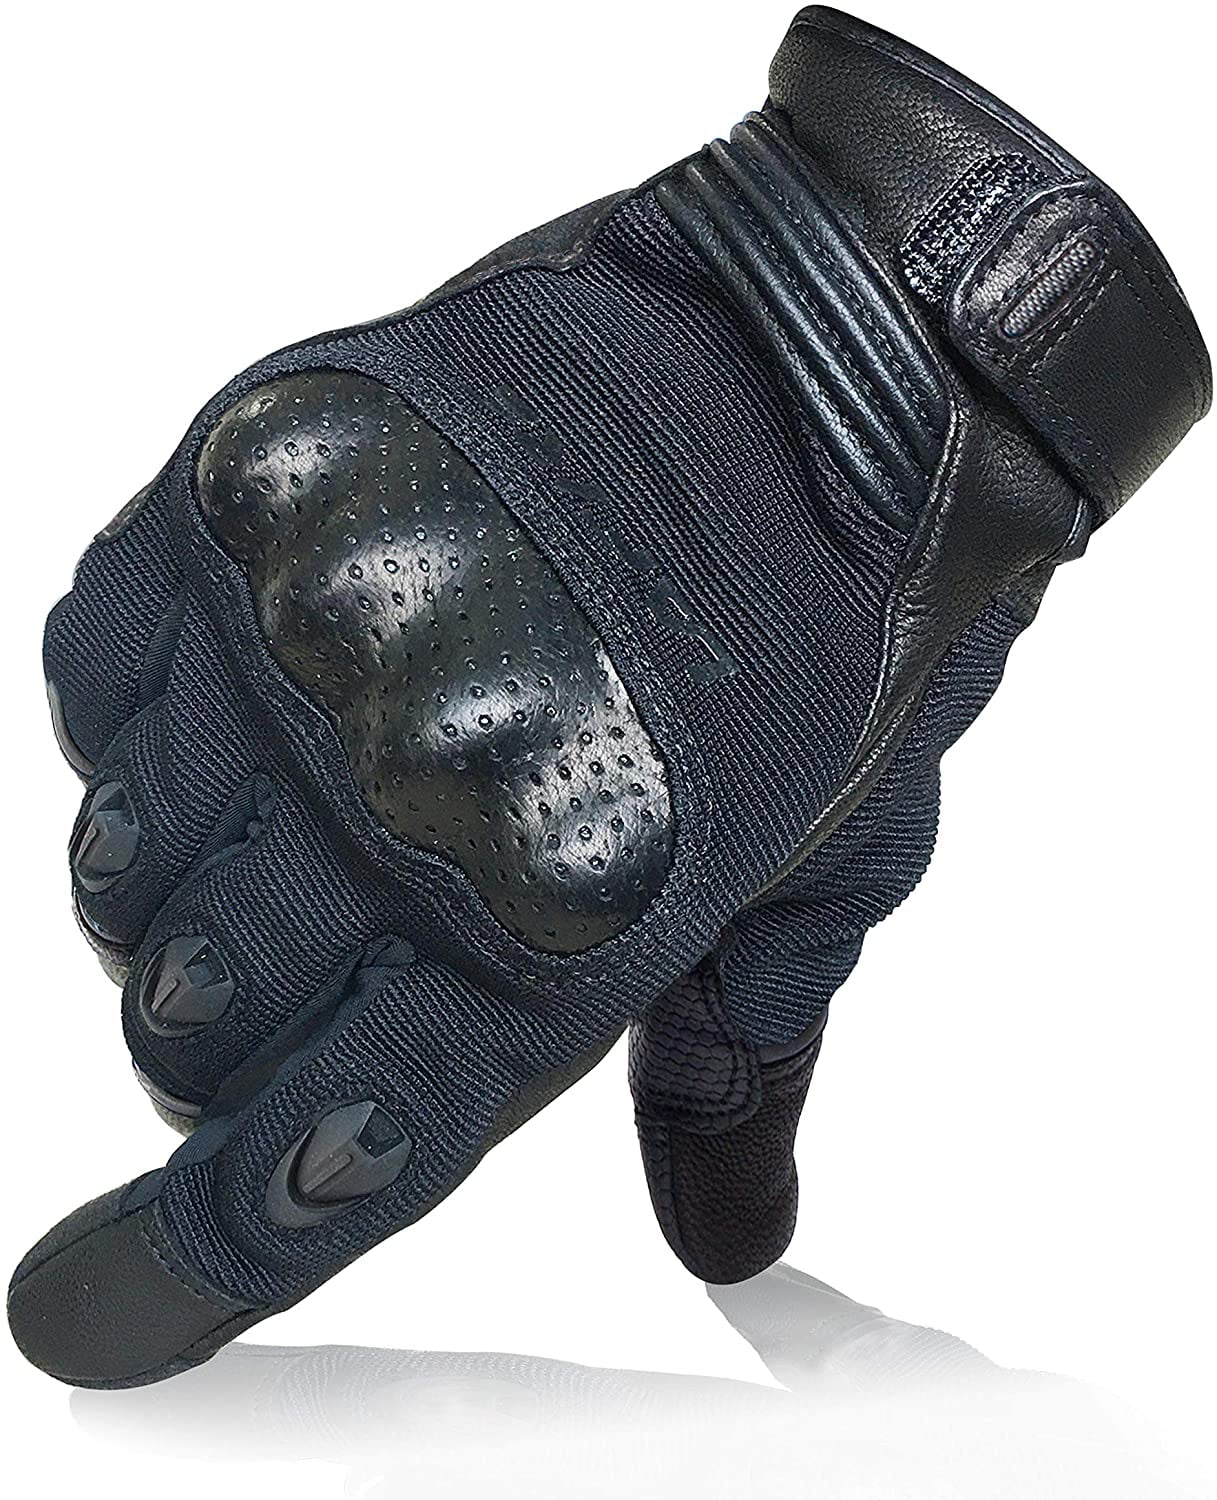 New Leather Motorbike Motorcycle Summer Gloves Knuckle Protection Vented 